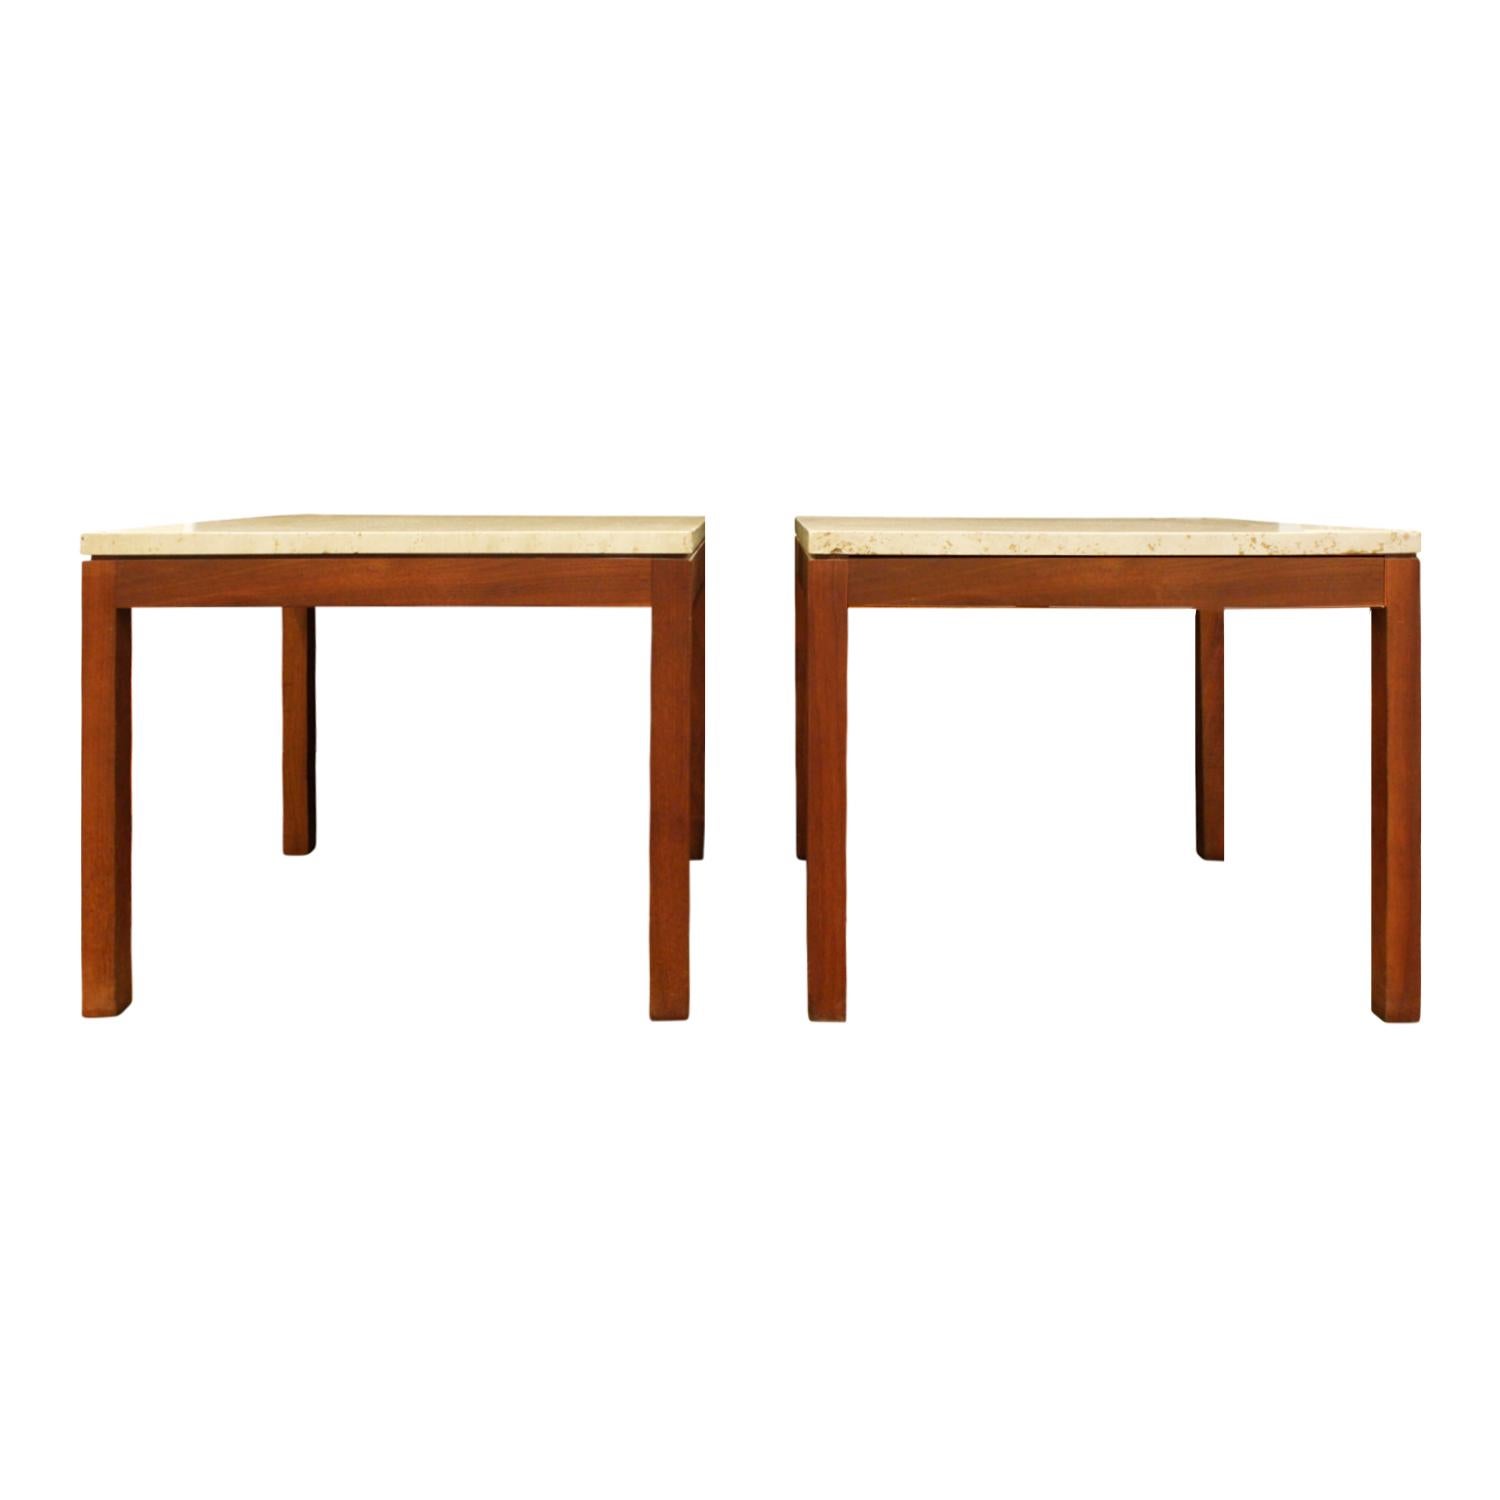 Pair of clean line end tables with bases in teak and tops in Italian travertine, American, 1950s.